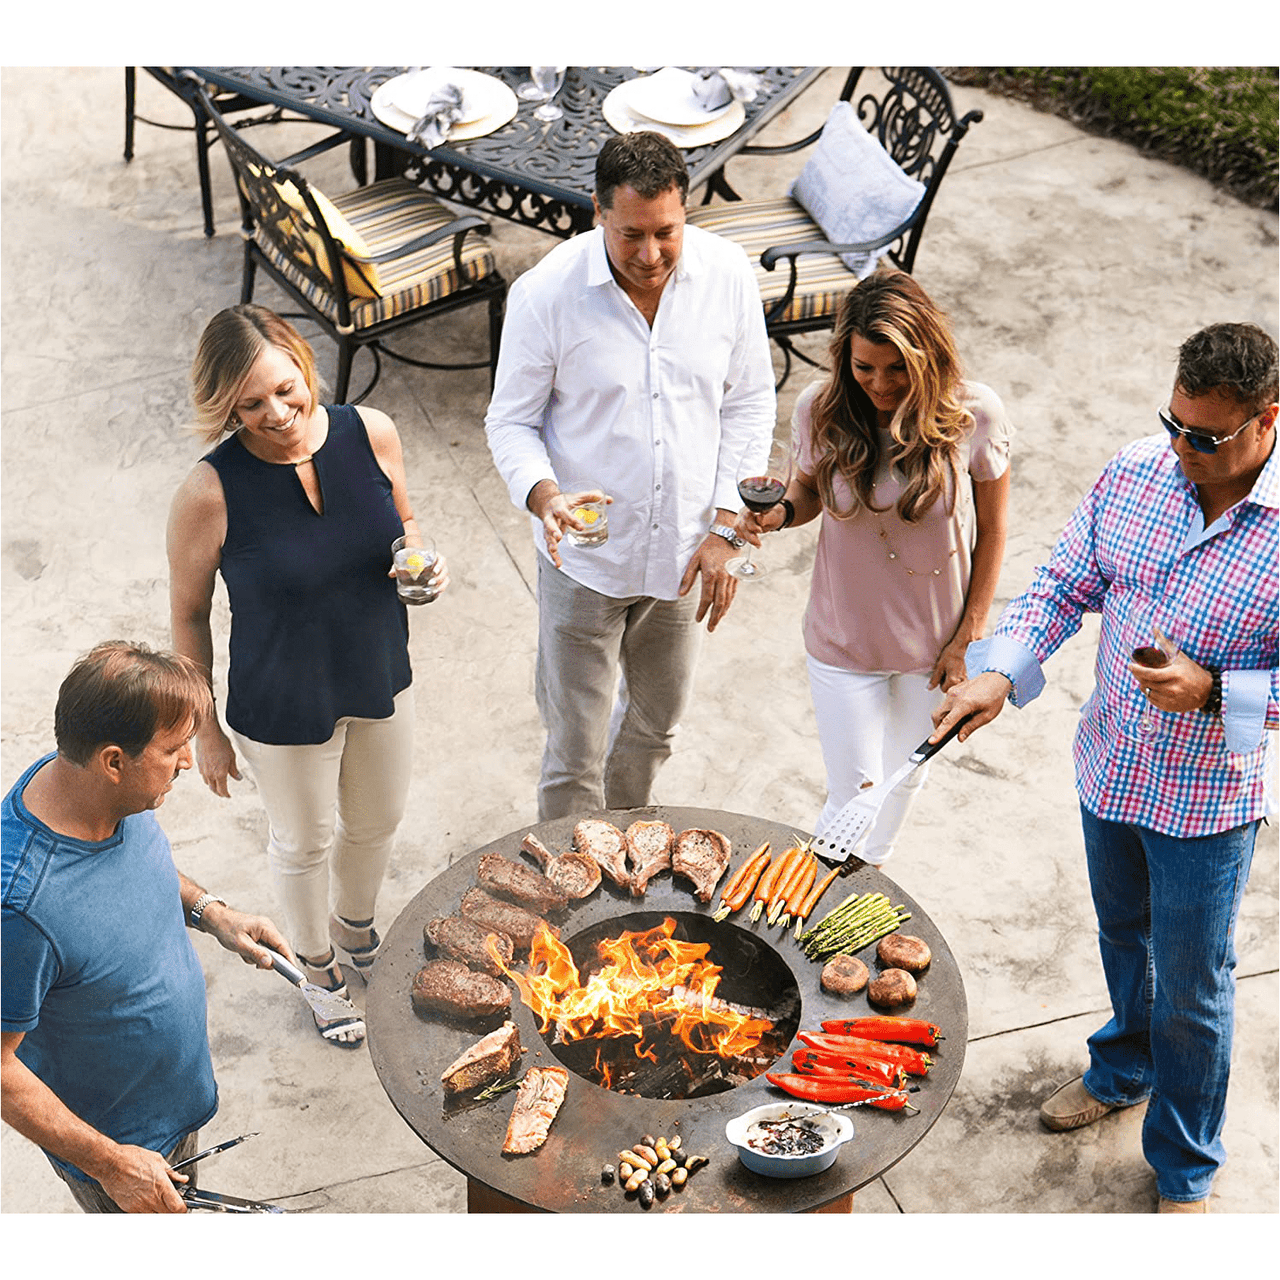 Arteflame Classic 40" Grill - Tall Round Base - Fire Pit Stock